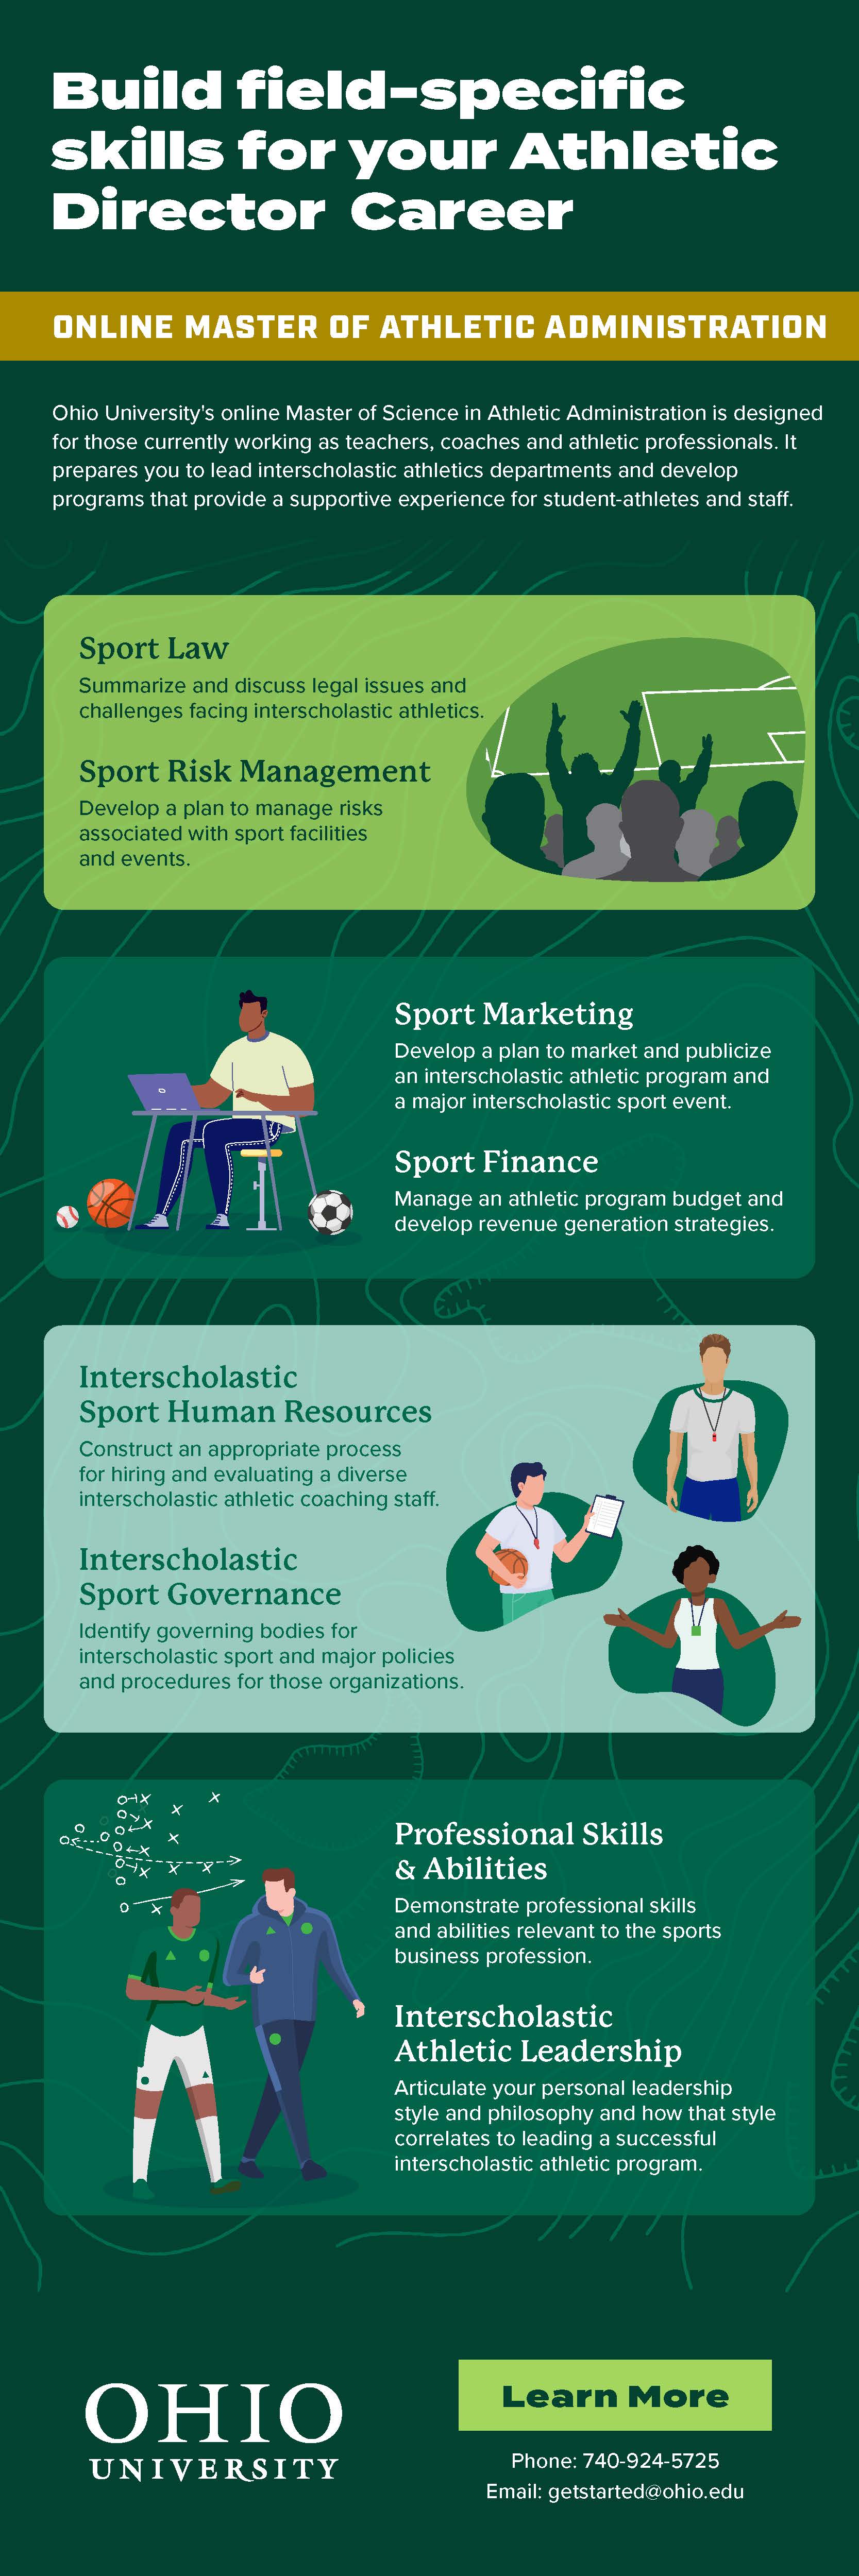 Jobs for Athletes after Sport - Starting a New Career